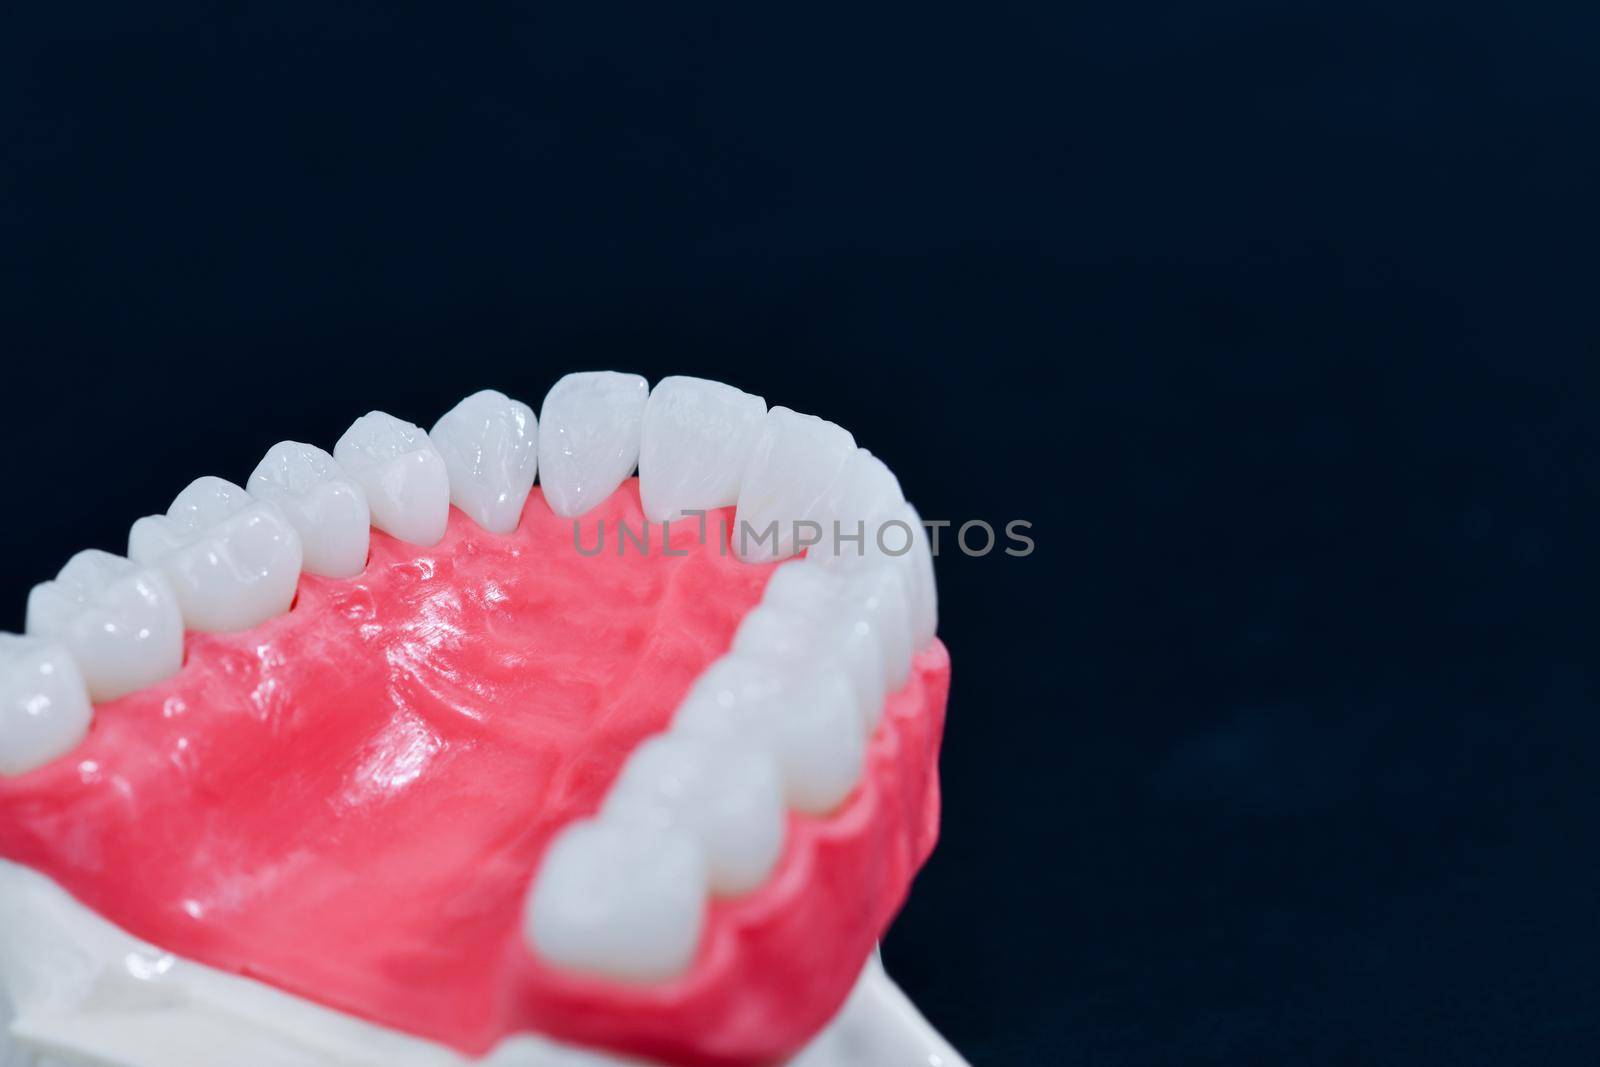 Upper human jaw with teeth and gums anatomy model by dotshock